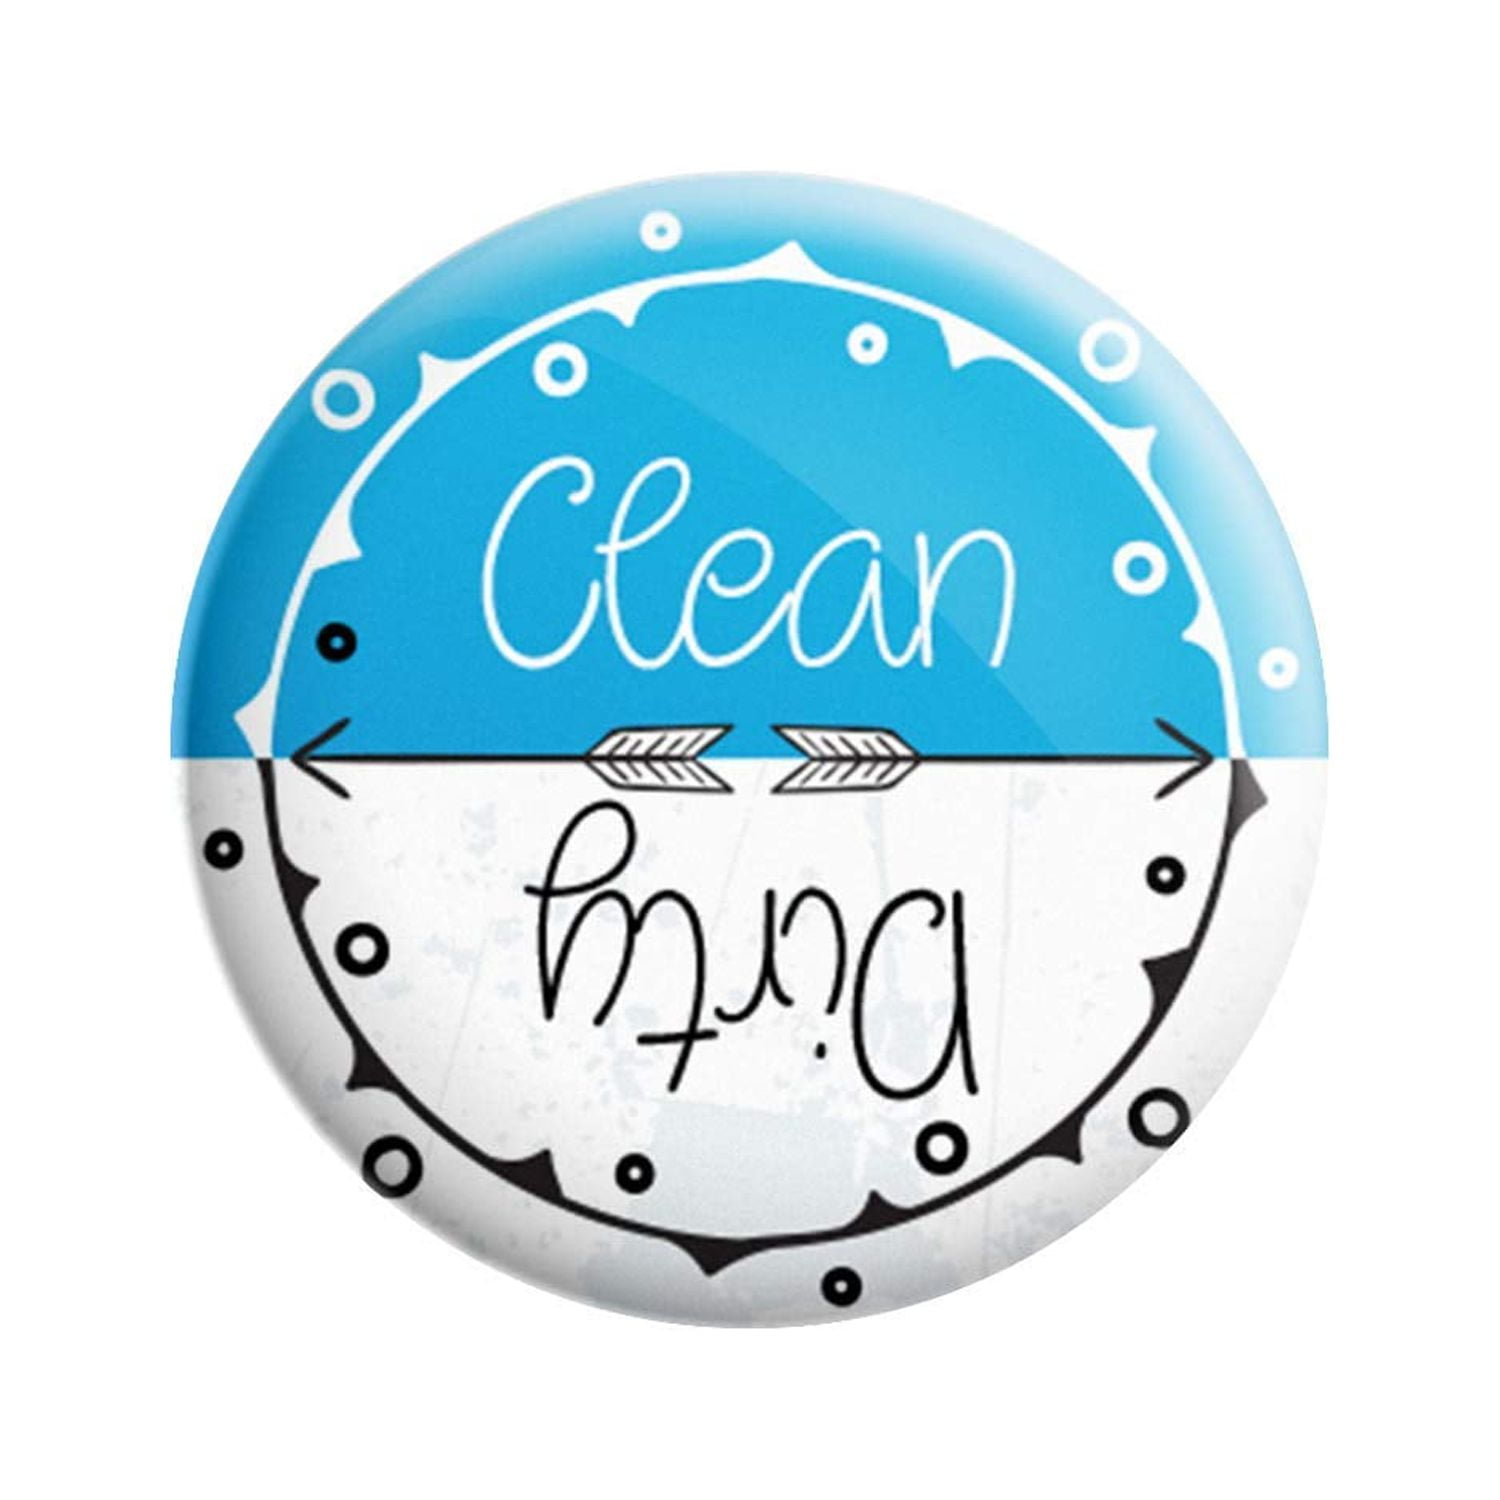 Brothers Bench Blue & Gray Dishwasher Magnet Clean Dirty Sign, Clean Dirty Magnet for Dishwasher, Universal Dishwasher Refrigerator Magnet for Kitchen